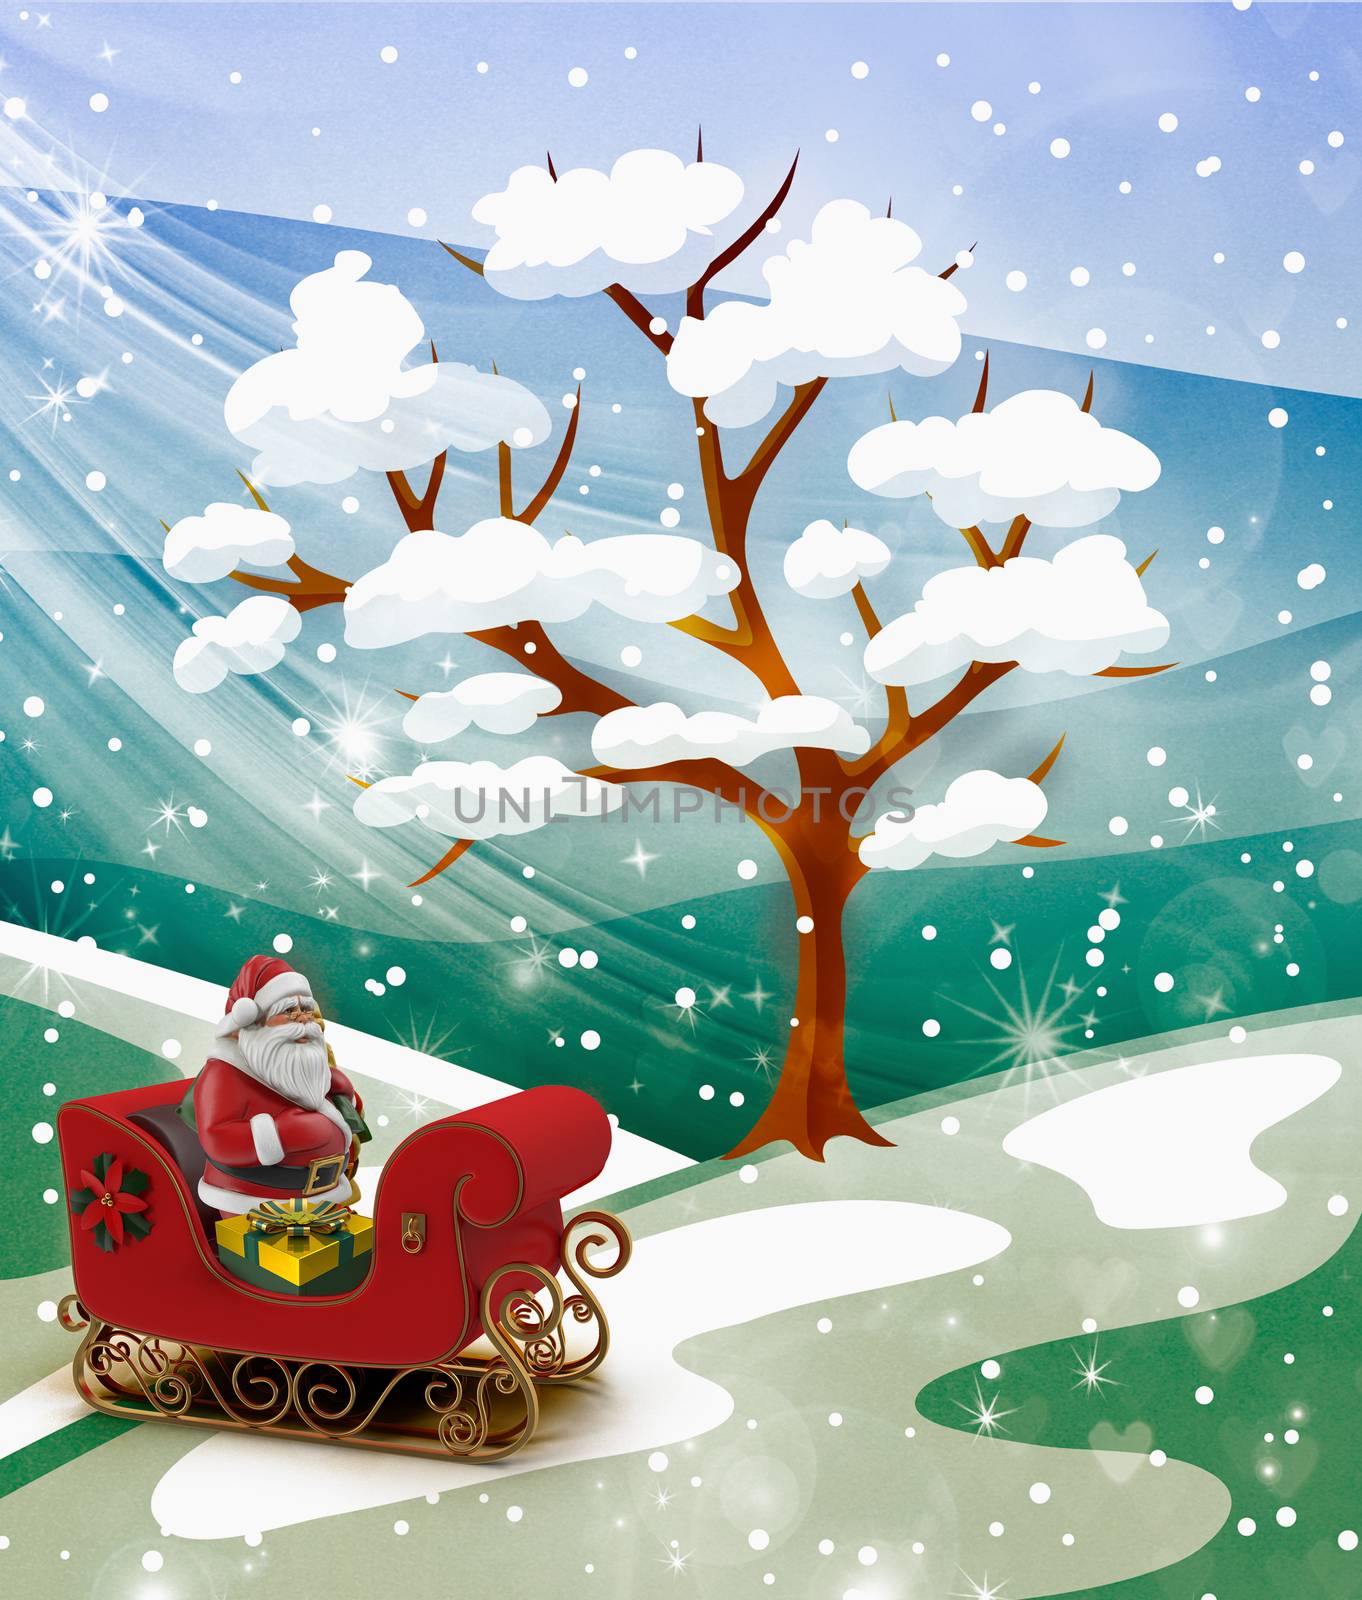 Among the snowdrifts under the tree Santa Claus in red sleigh with gifts.